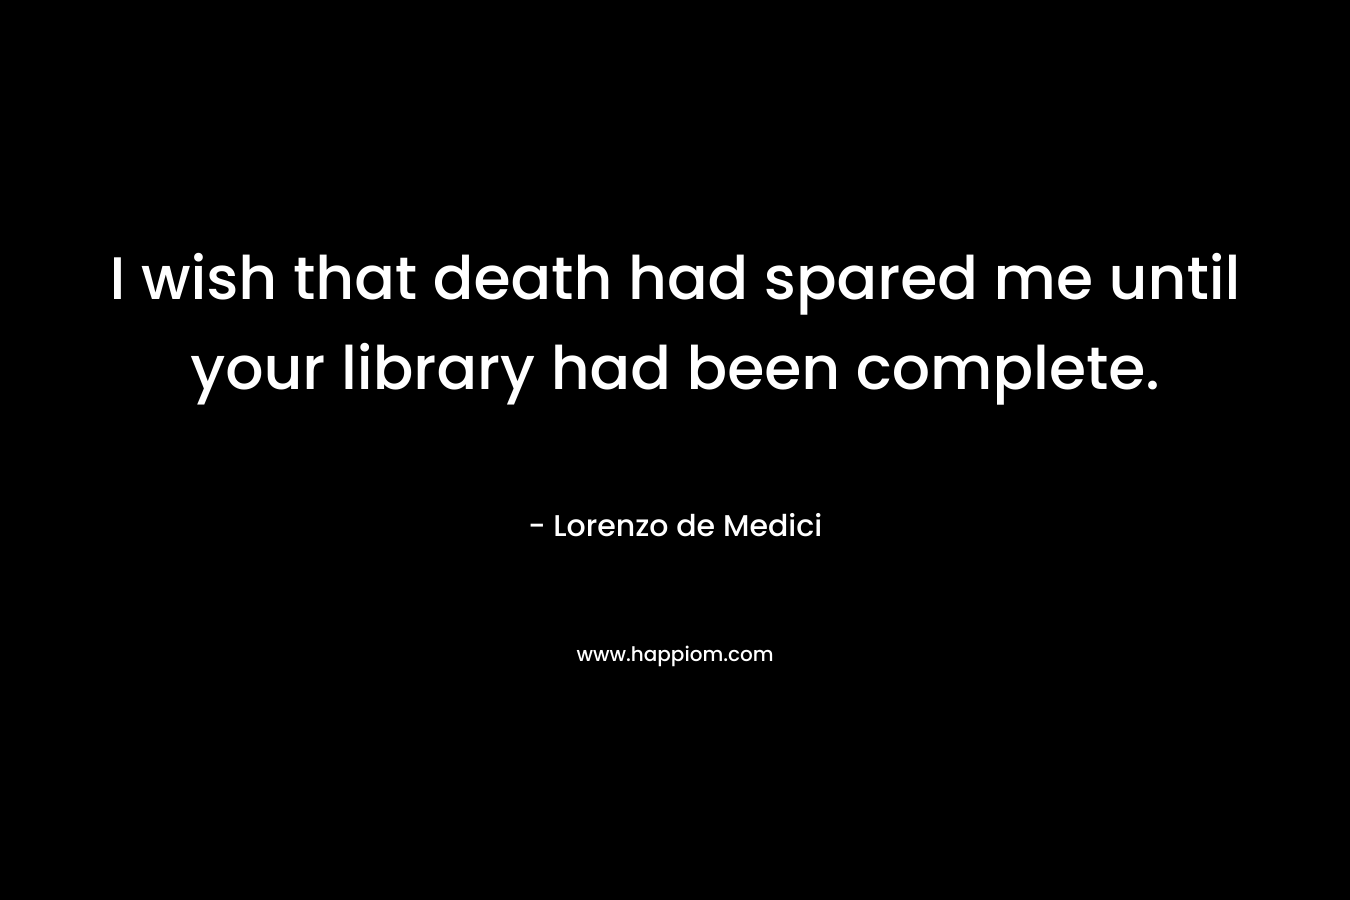 I wish that death had spared me until your library had been complete.